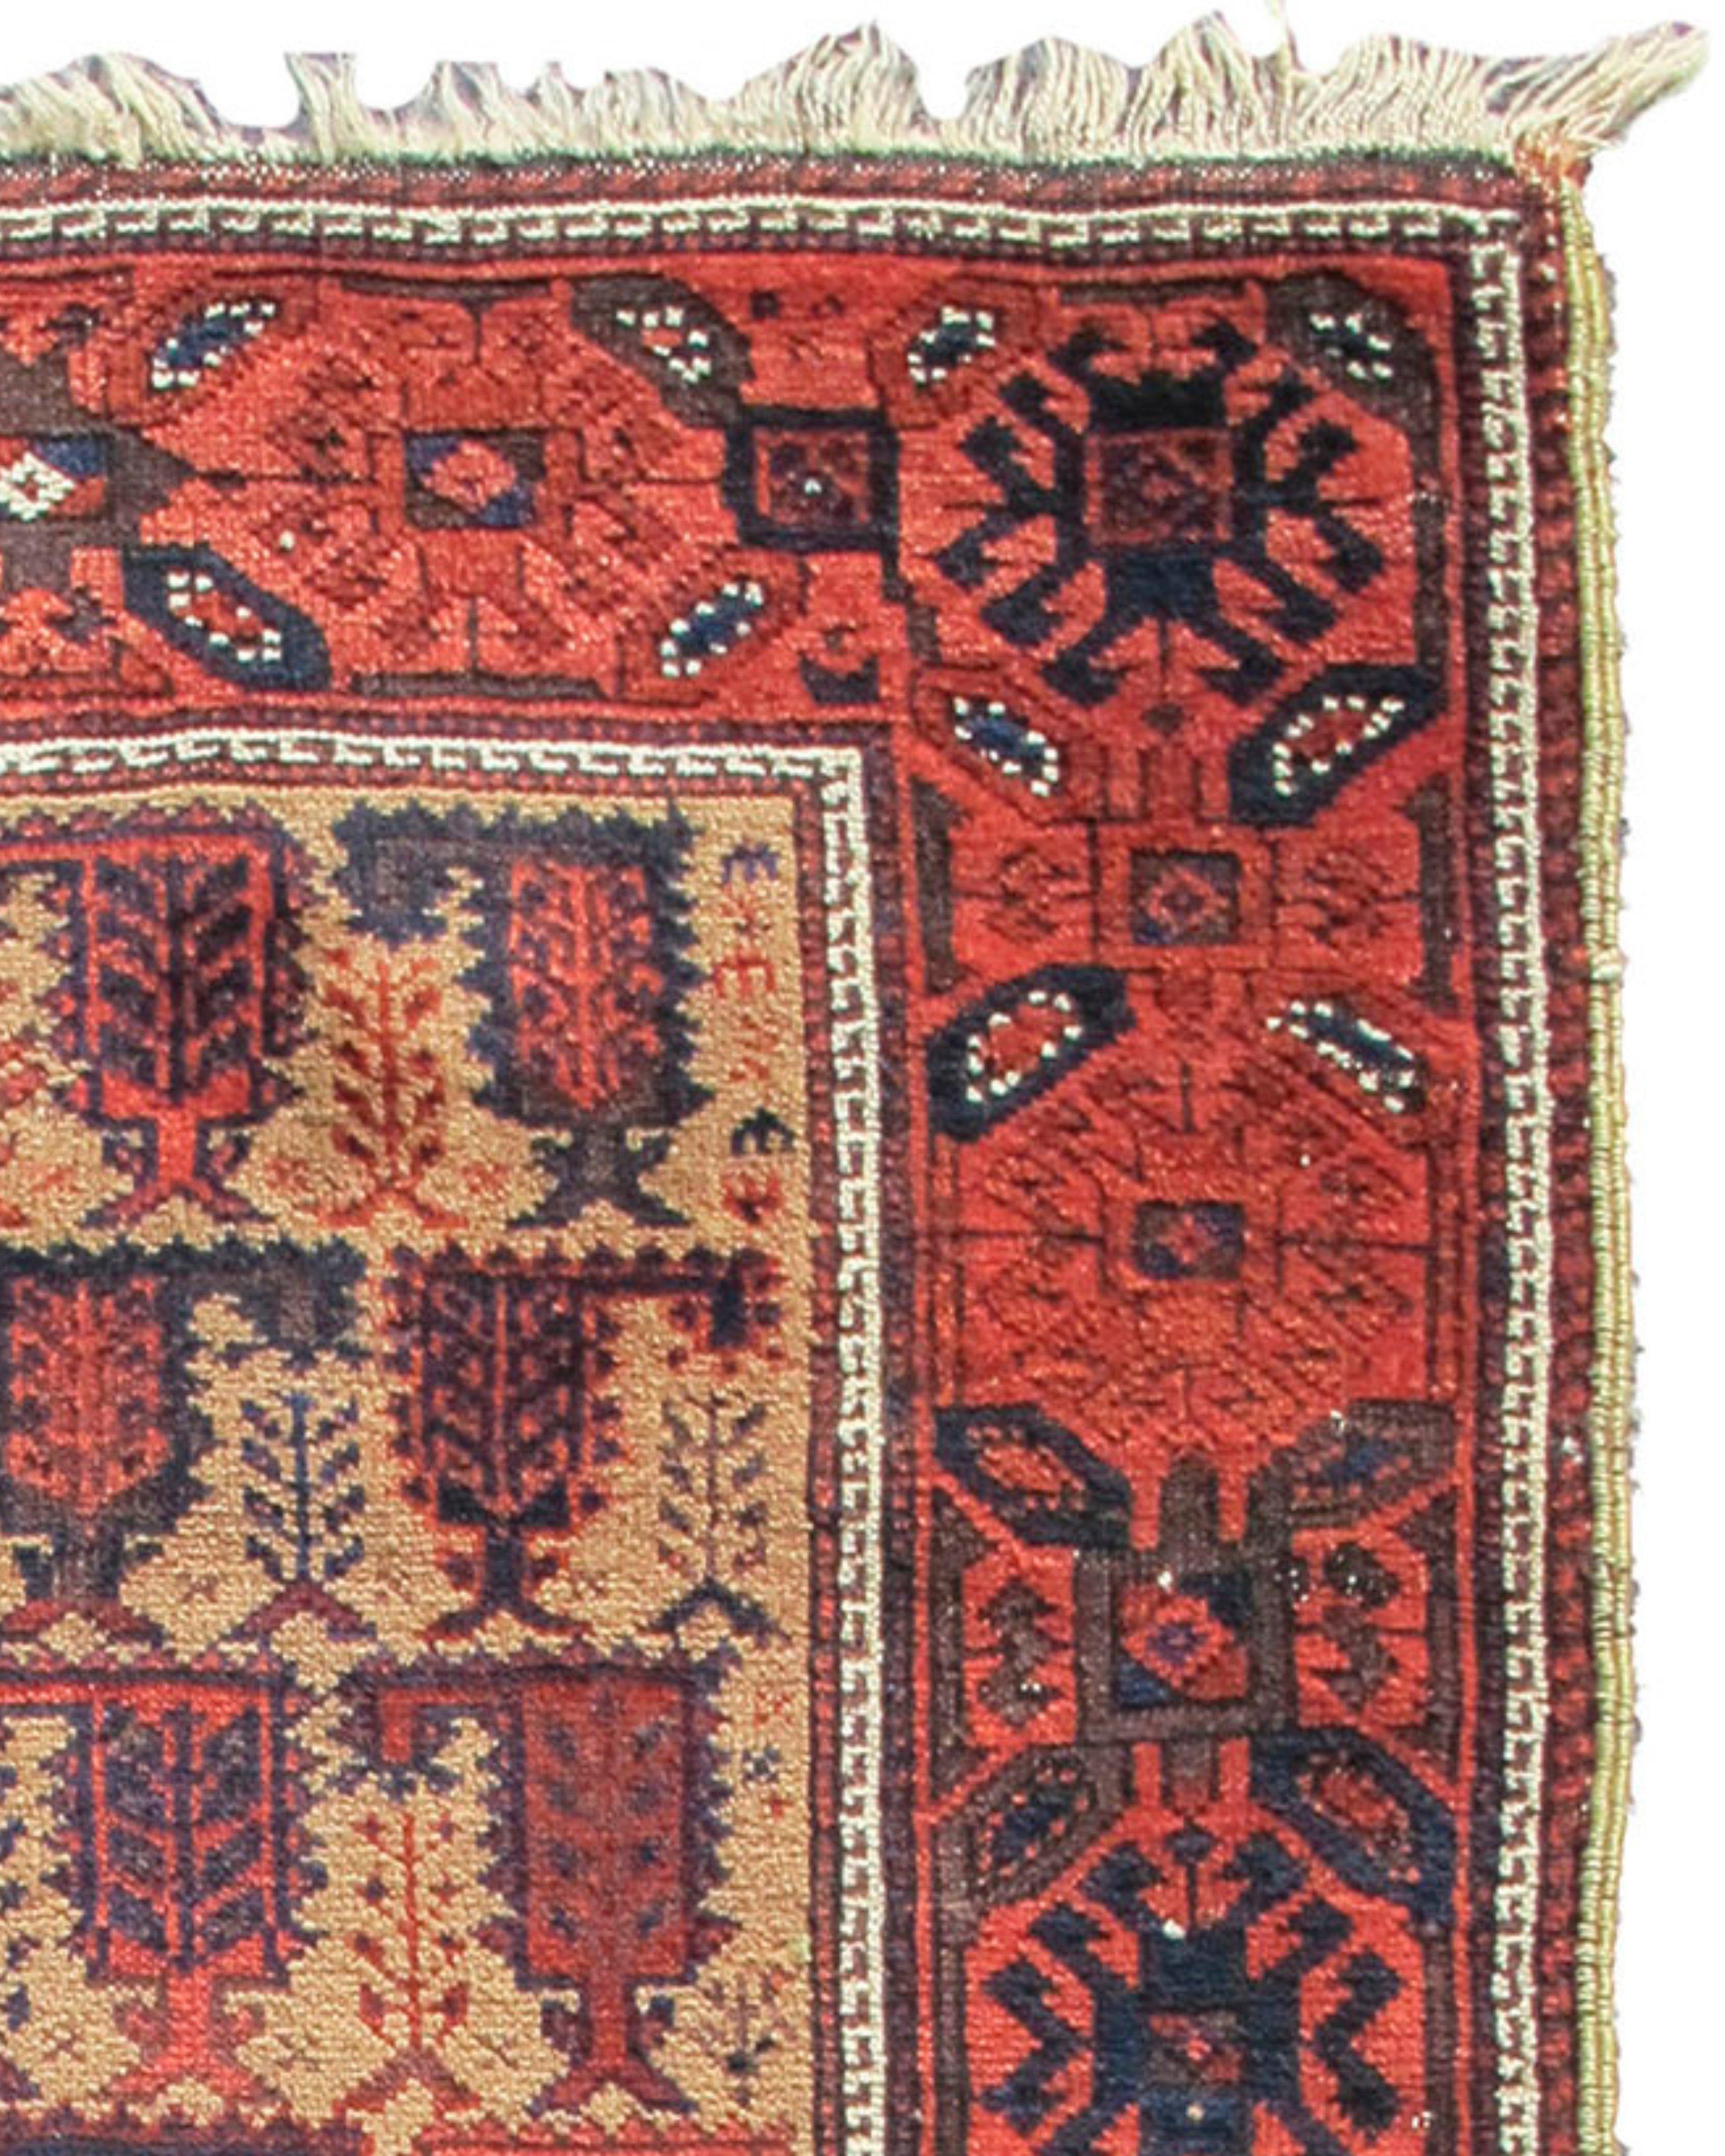 Antique Persian Baluch Rug, Late 19th Century

Additional Information:
Dimensions: 2'10